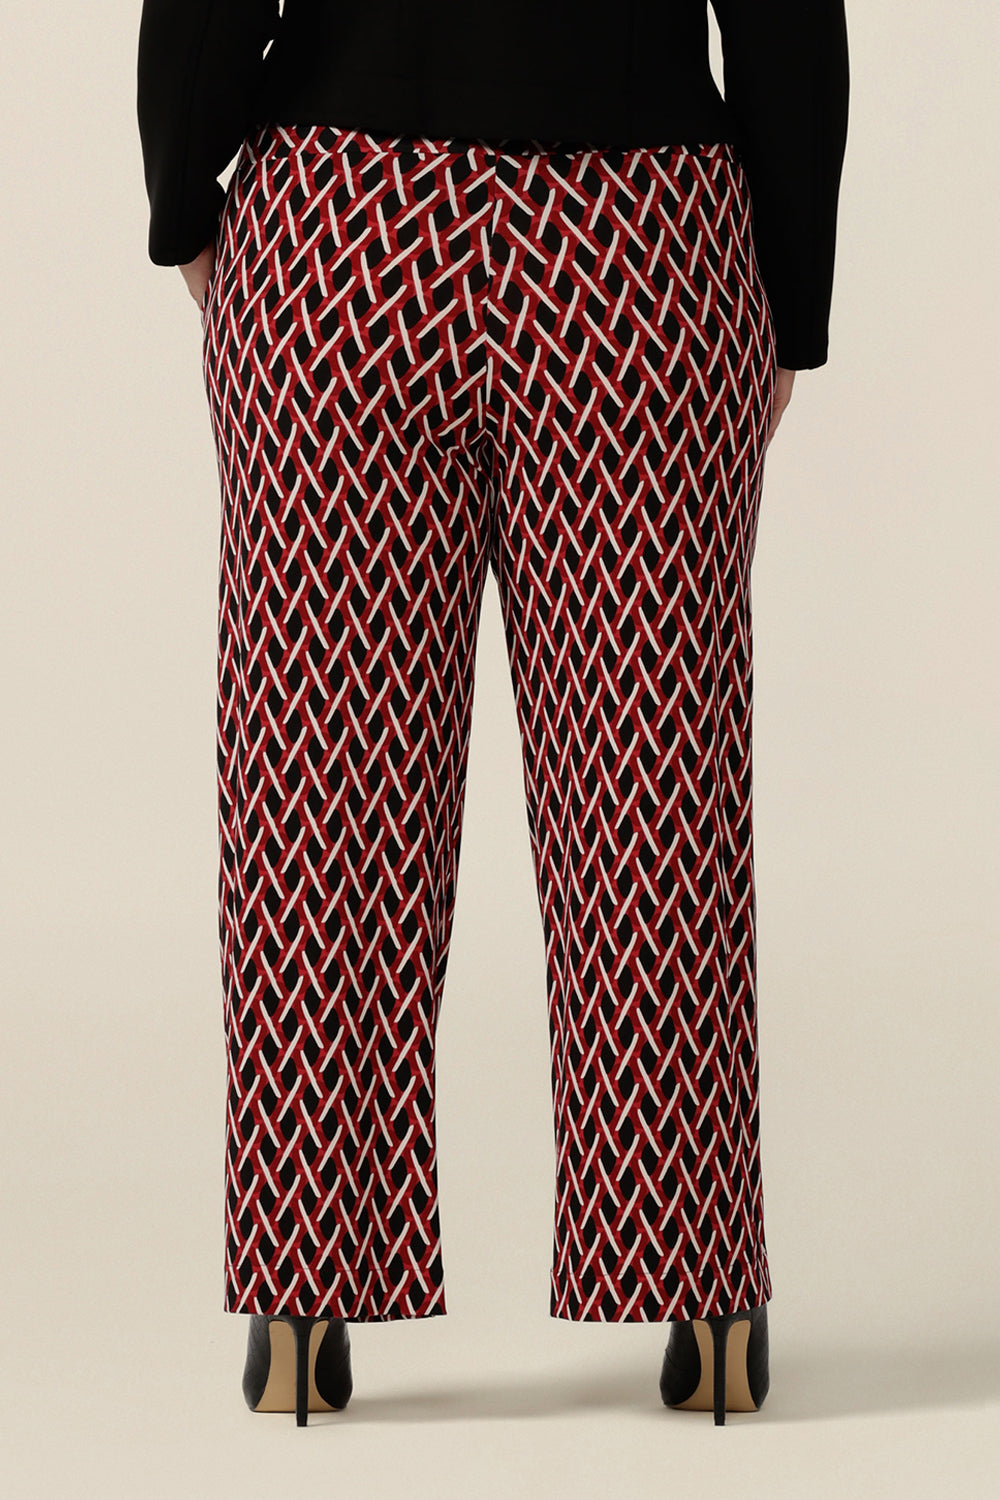 Back view of good pants for plus size women, these geometric print pants are straight cut , wide leg trousers with a wide, pull-on waistband. Made in Australia by Australian fashion brand, Leina & Fleur, shop online now in sizes 8 to 24.